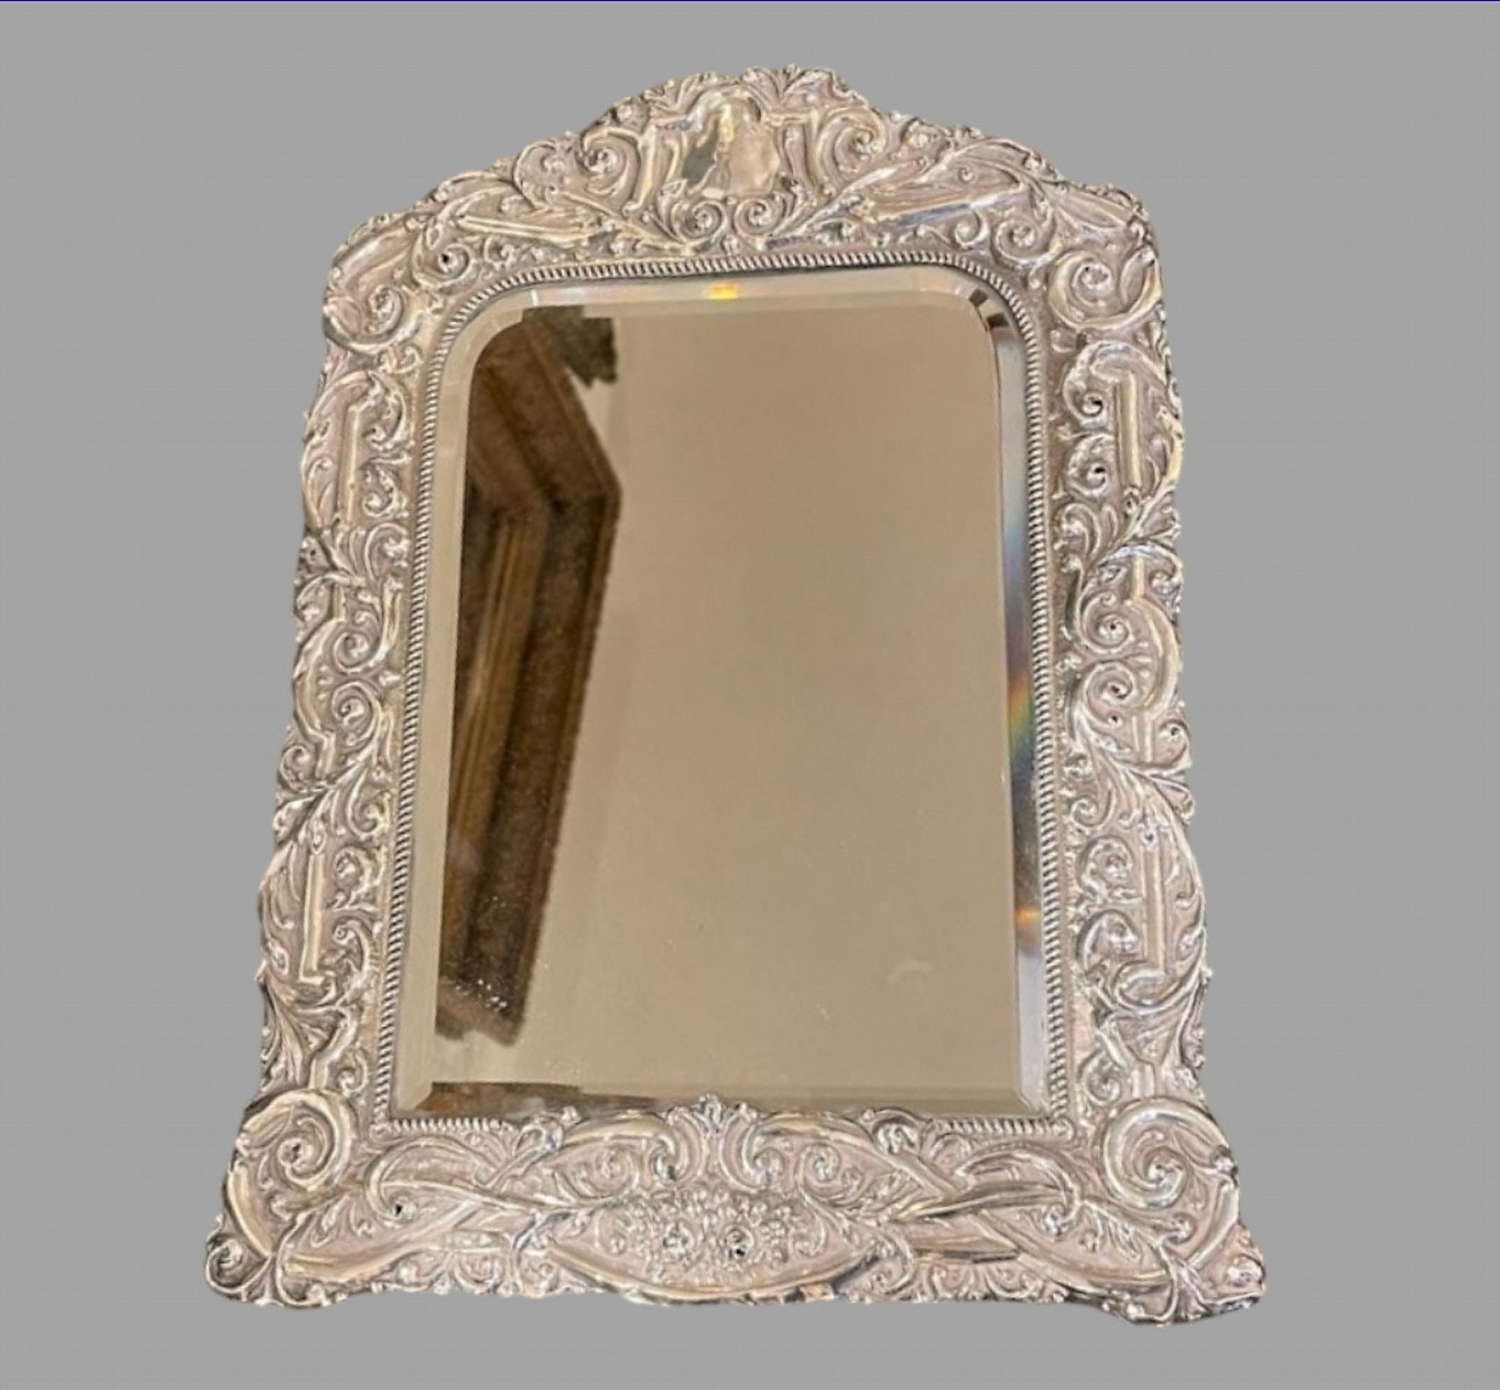 A 1900 Silver Standing Mirror